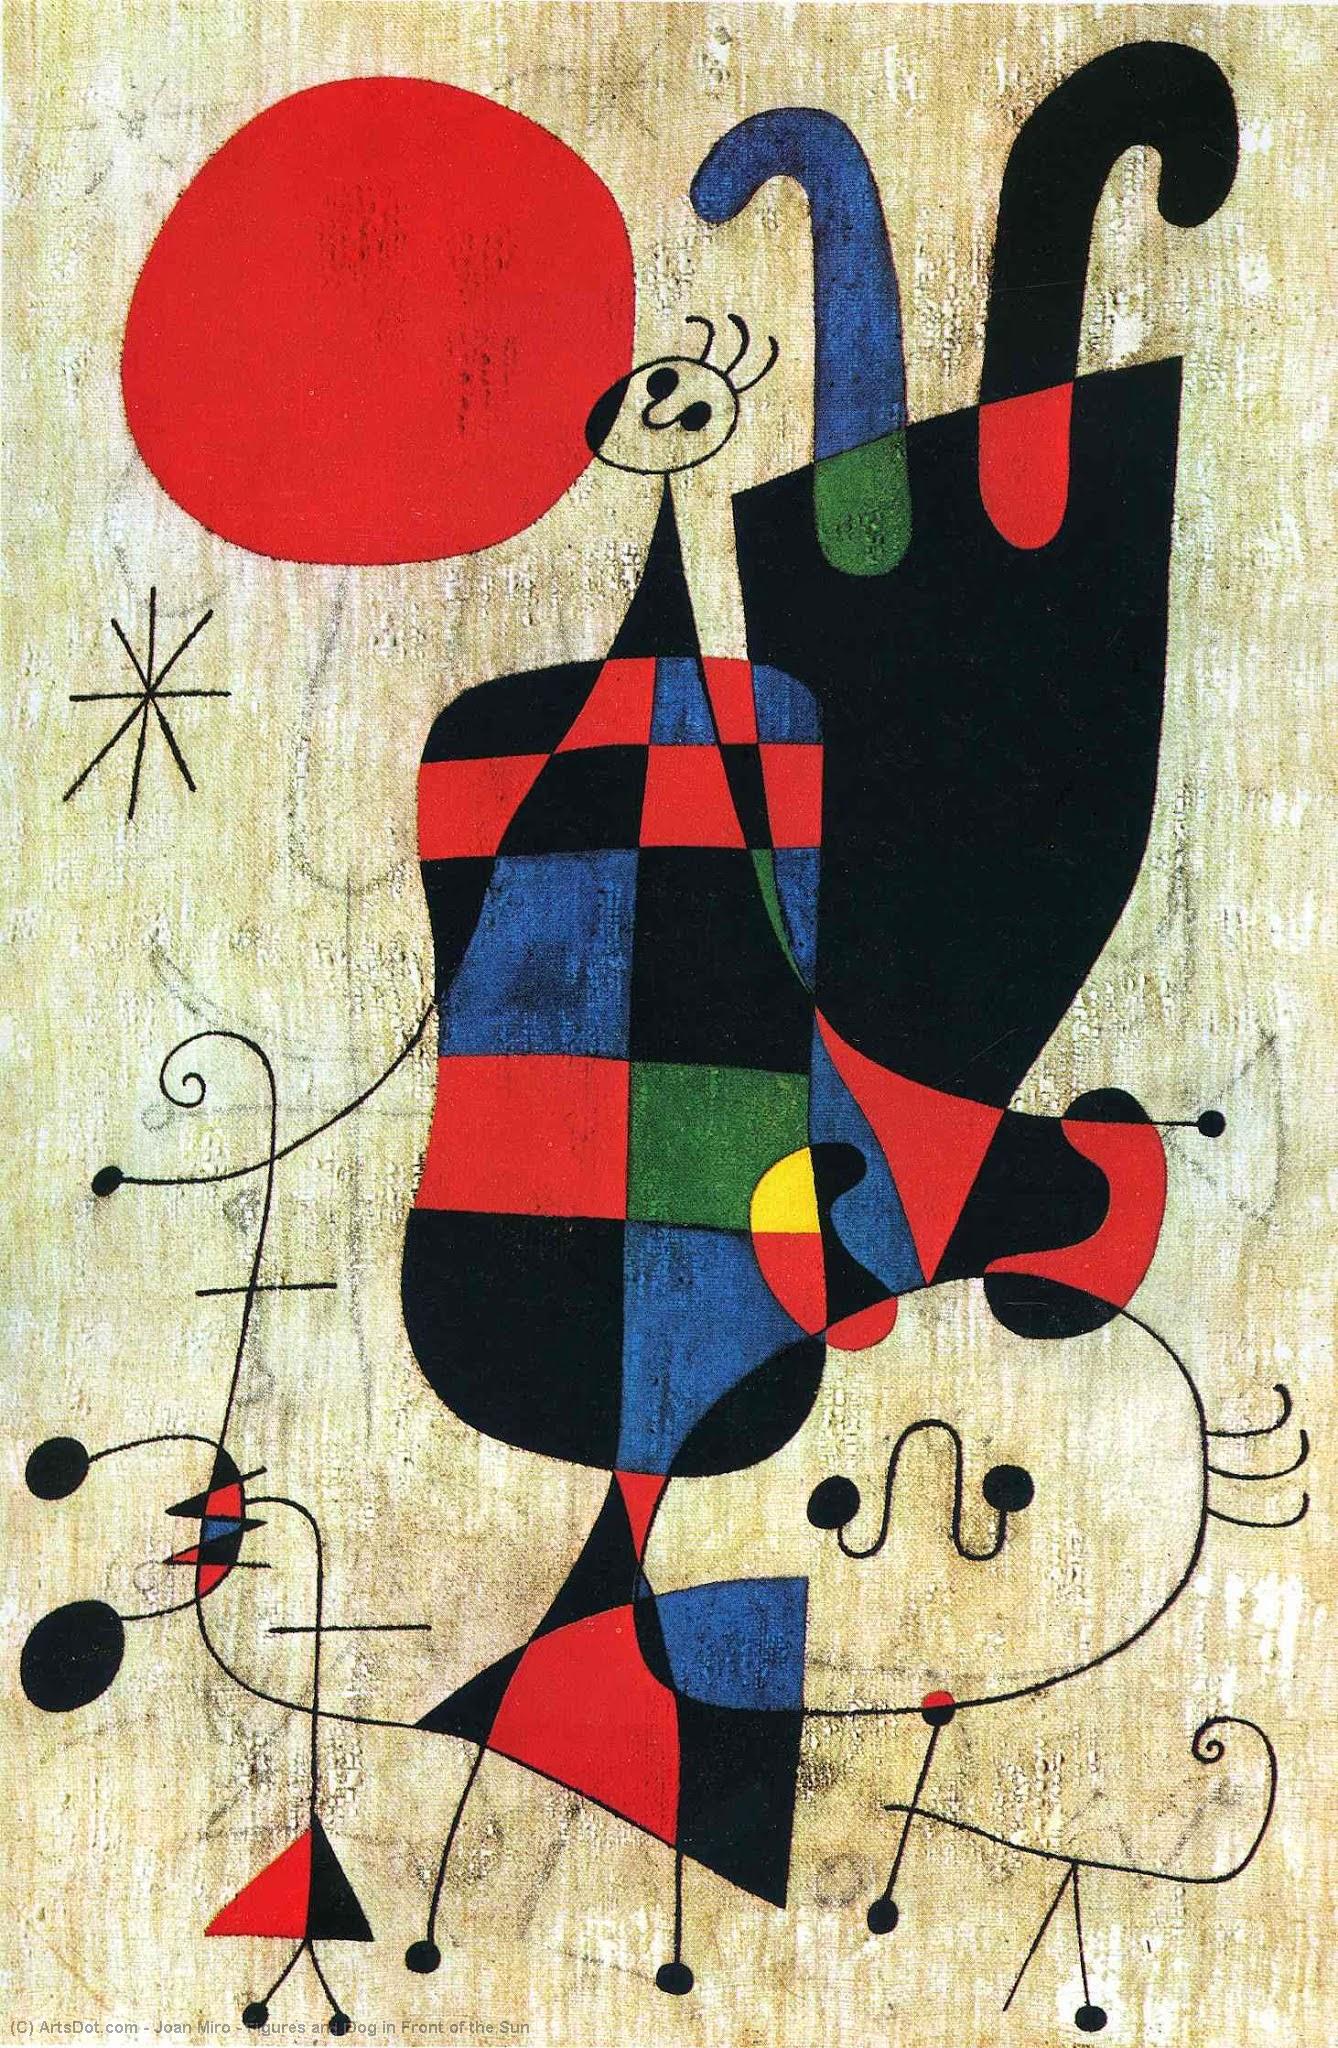 WikiOO.org - 백과 사전 - 회화, 삽화 Joan Miro - Figures and Dog in Front of the Sun